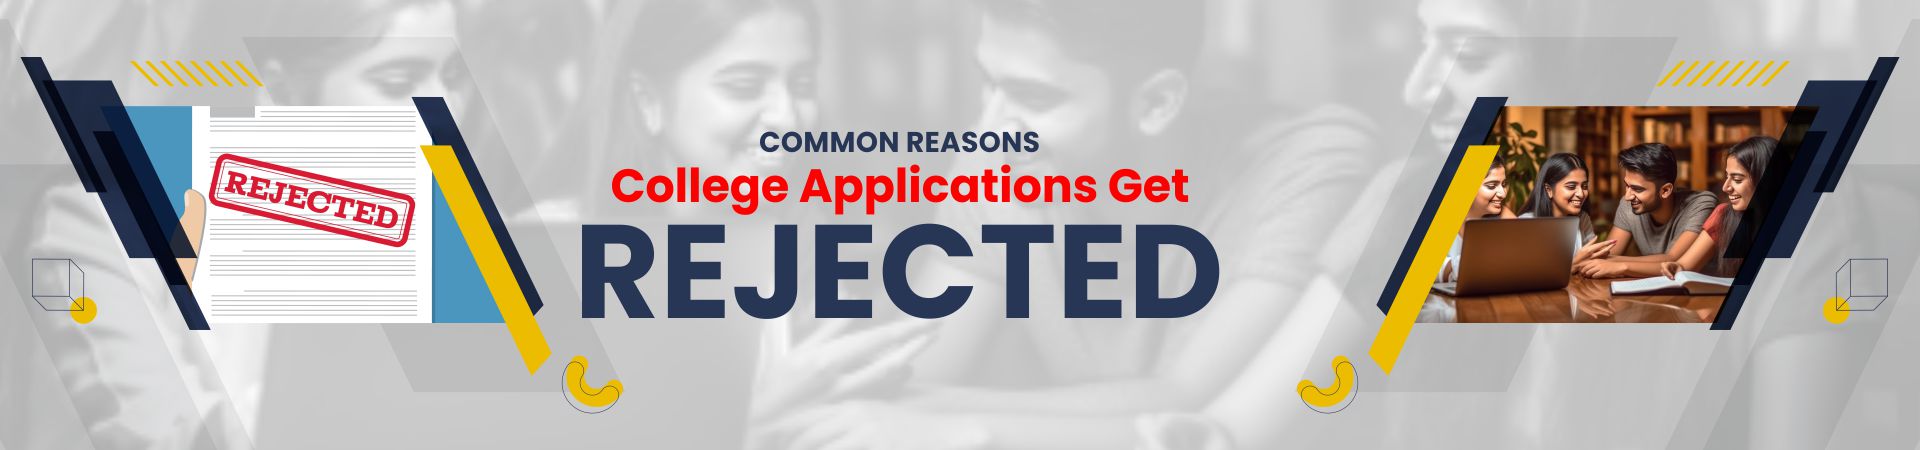 Common Reasons College Applications Get Rejected